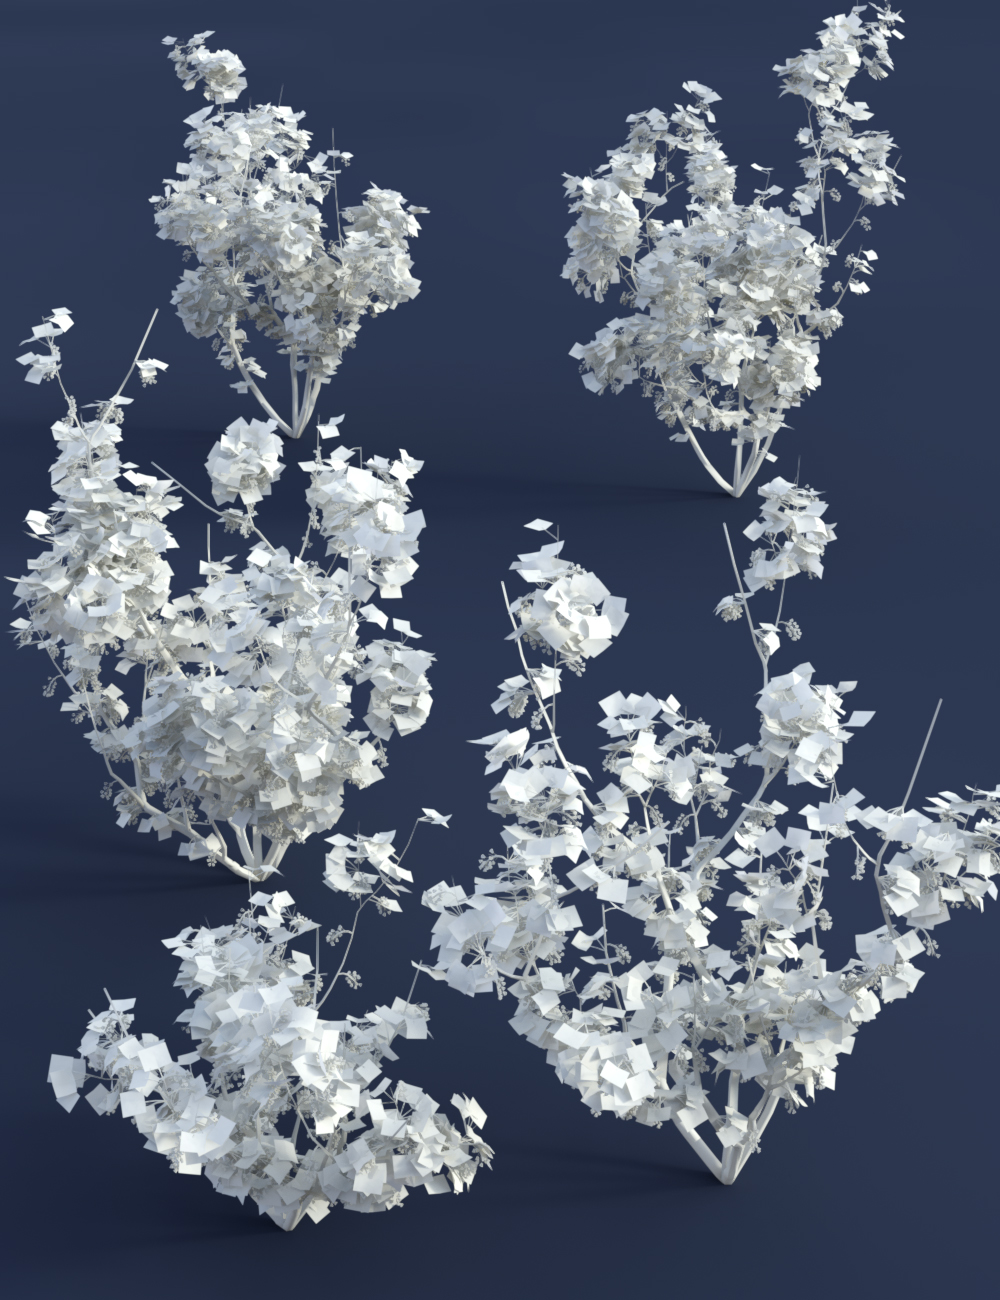 Spring Flowers - Flowering Currant Bushes by: MartinJFrost, 3D Models by Daz 3D